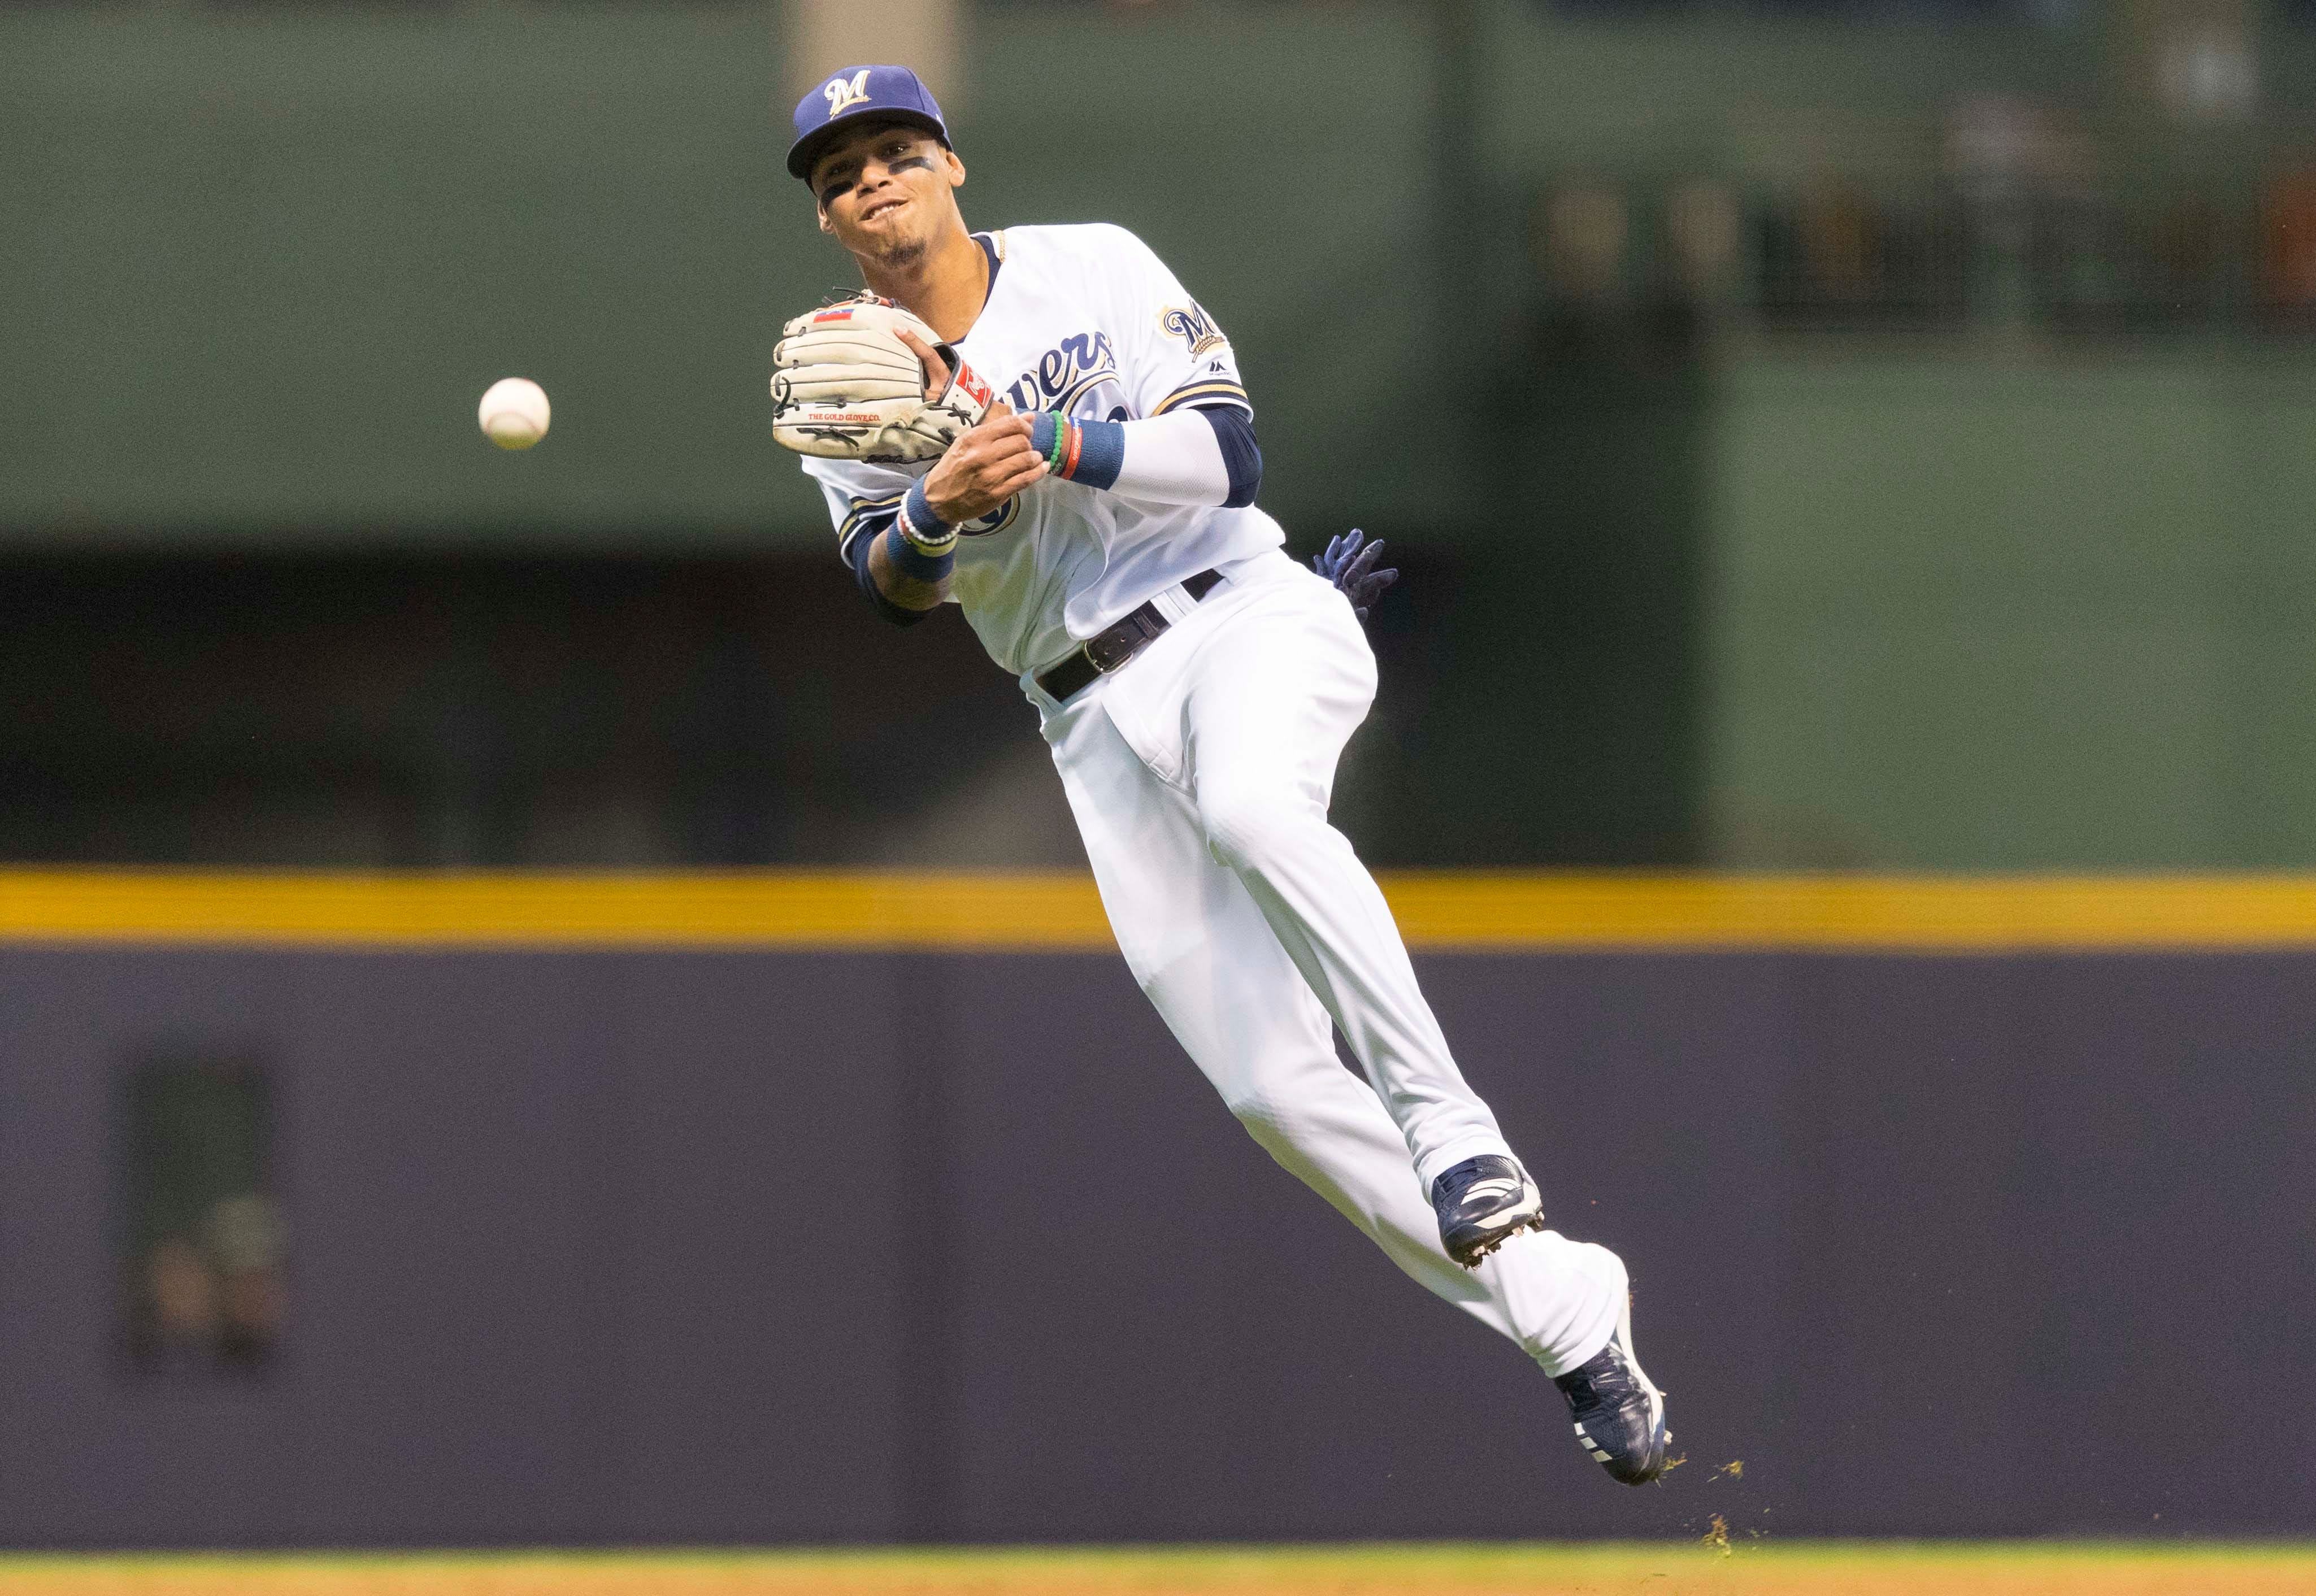 Milwaukee Brewers shortstop Orlando Arcia throws out Cincinnati Reds right fielder Jesse Winker during the third inning at Miller Park in Milwaukee.